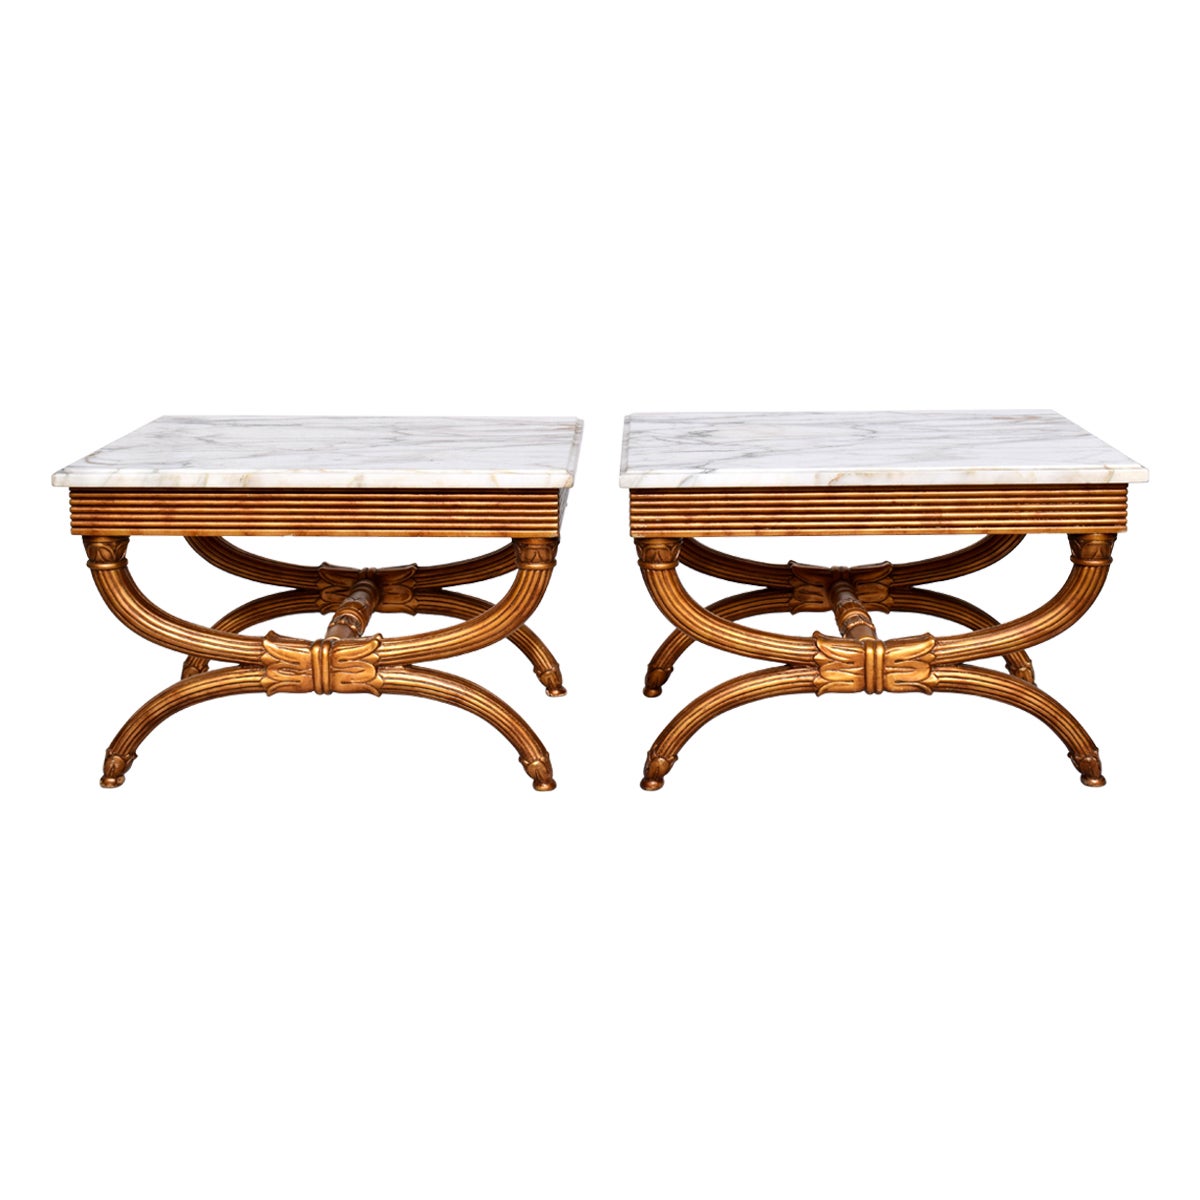 Neoclassical Style Curule Leg Marble Top Tables, Pair